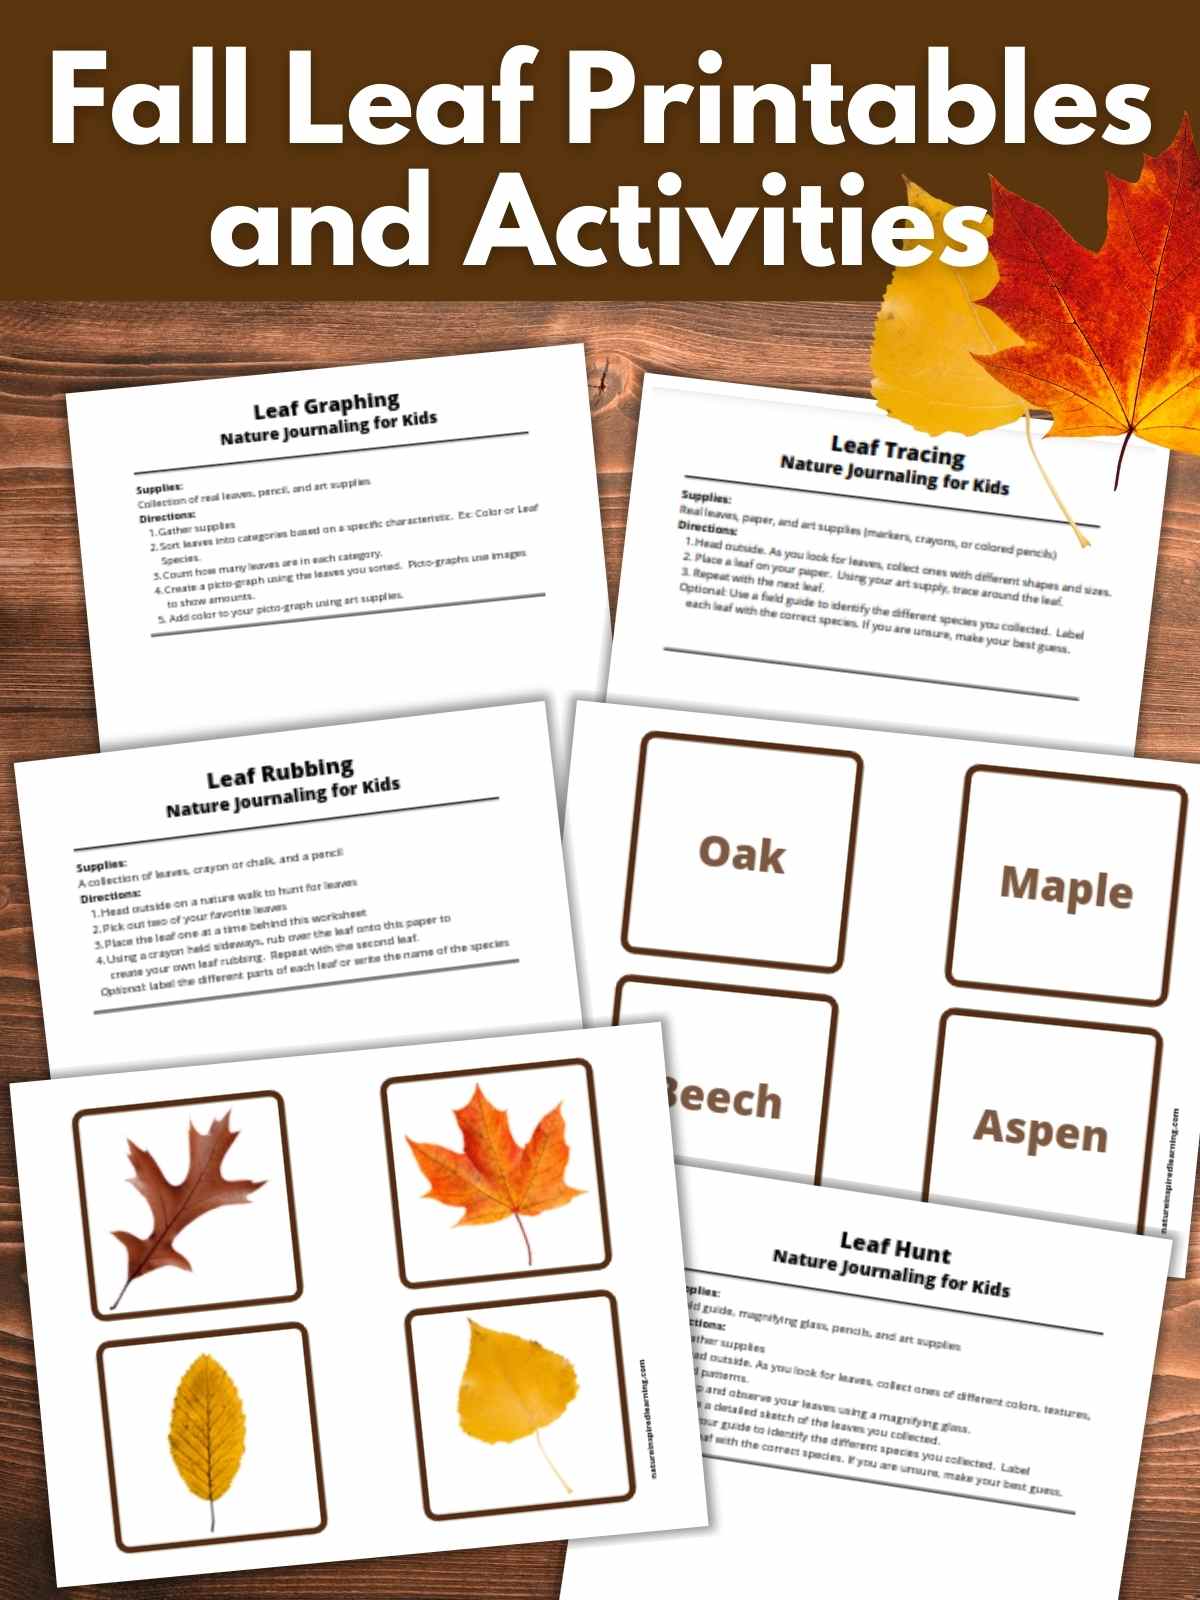 six printable fall leaf activities including colorful leaf id cards overlapping on a wooden background with a red maple leaf and yellow aspen leaf upper right with text overlay across the top over a brown background